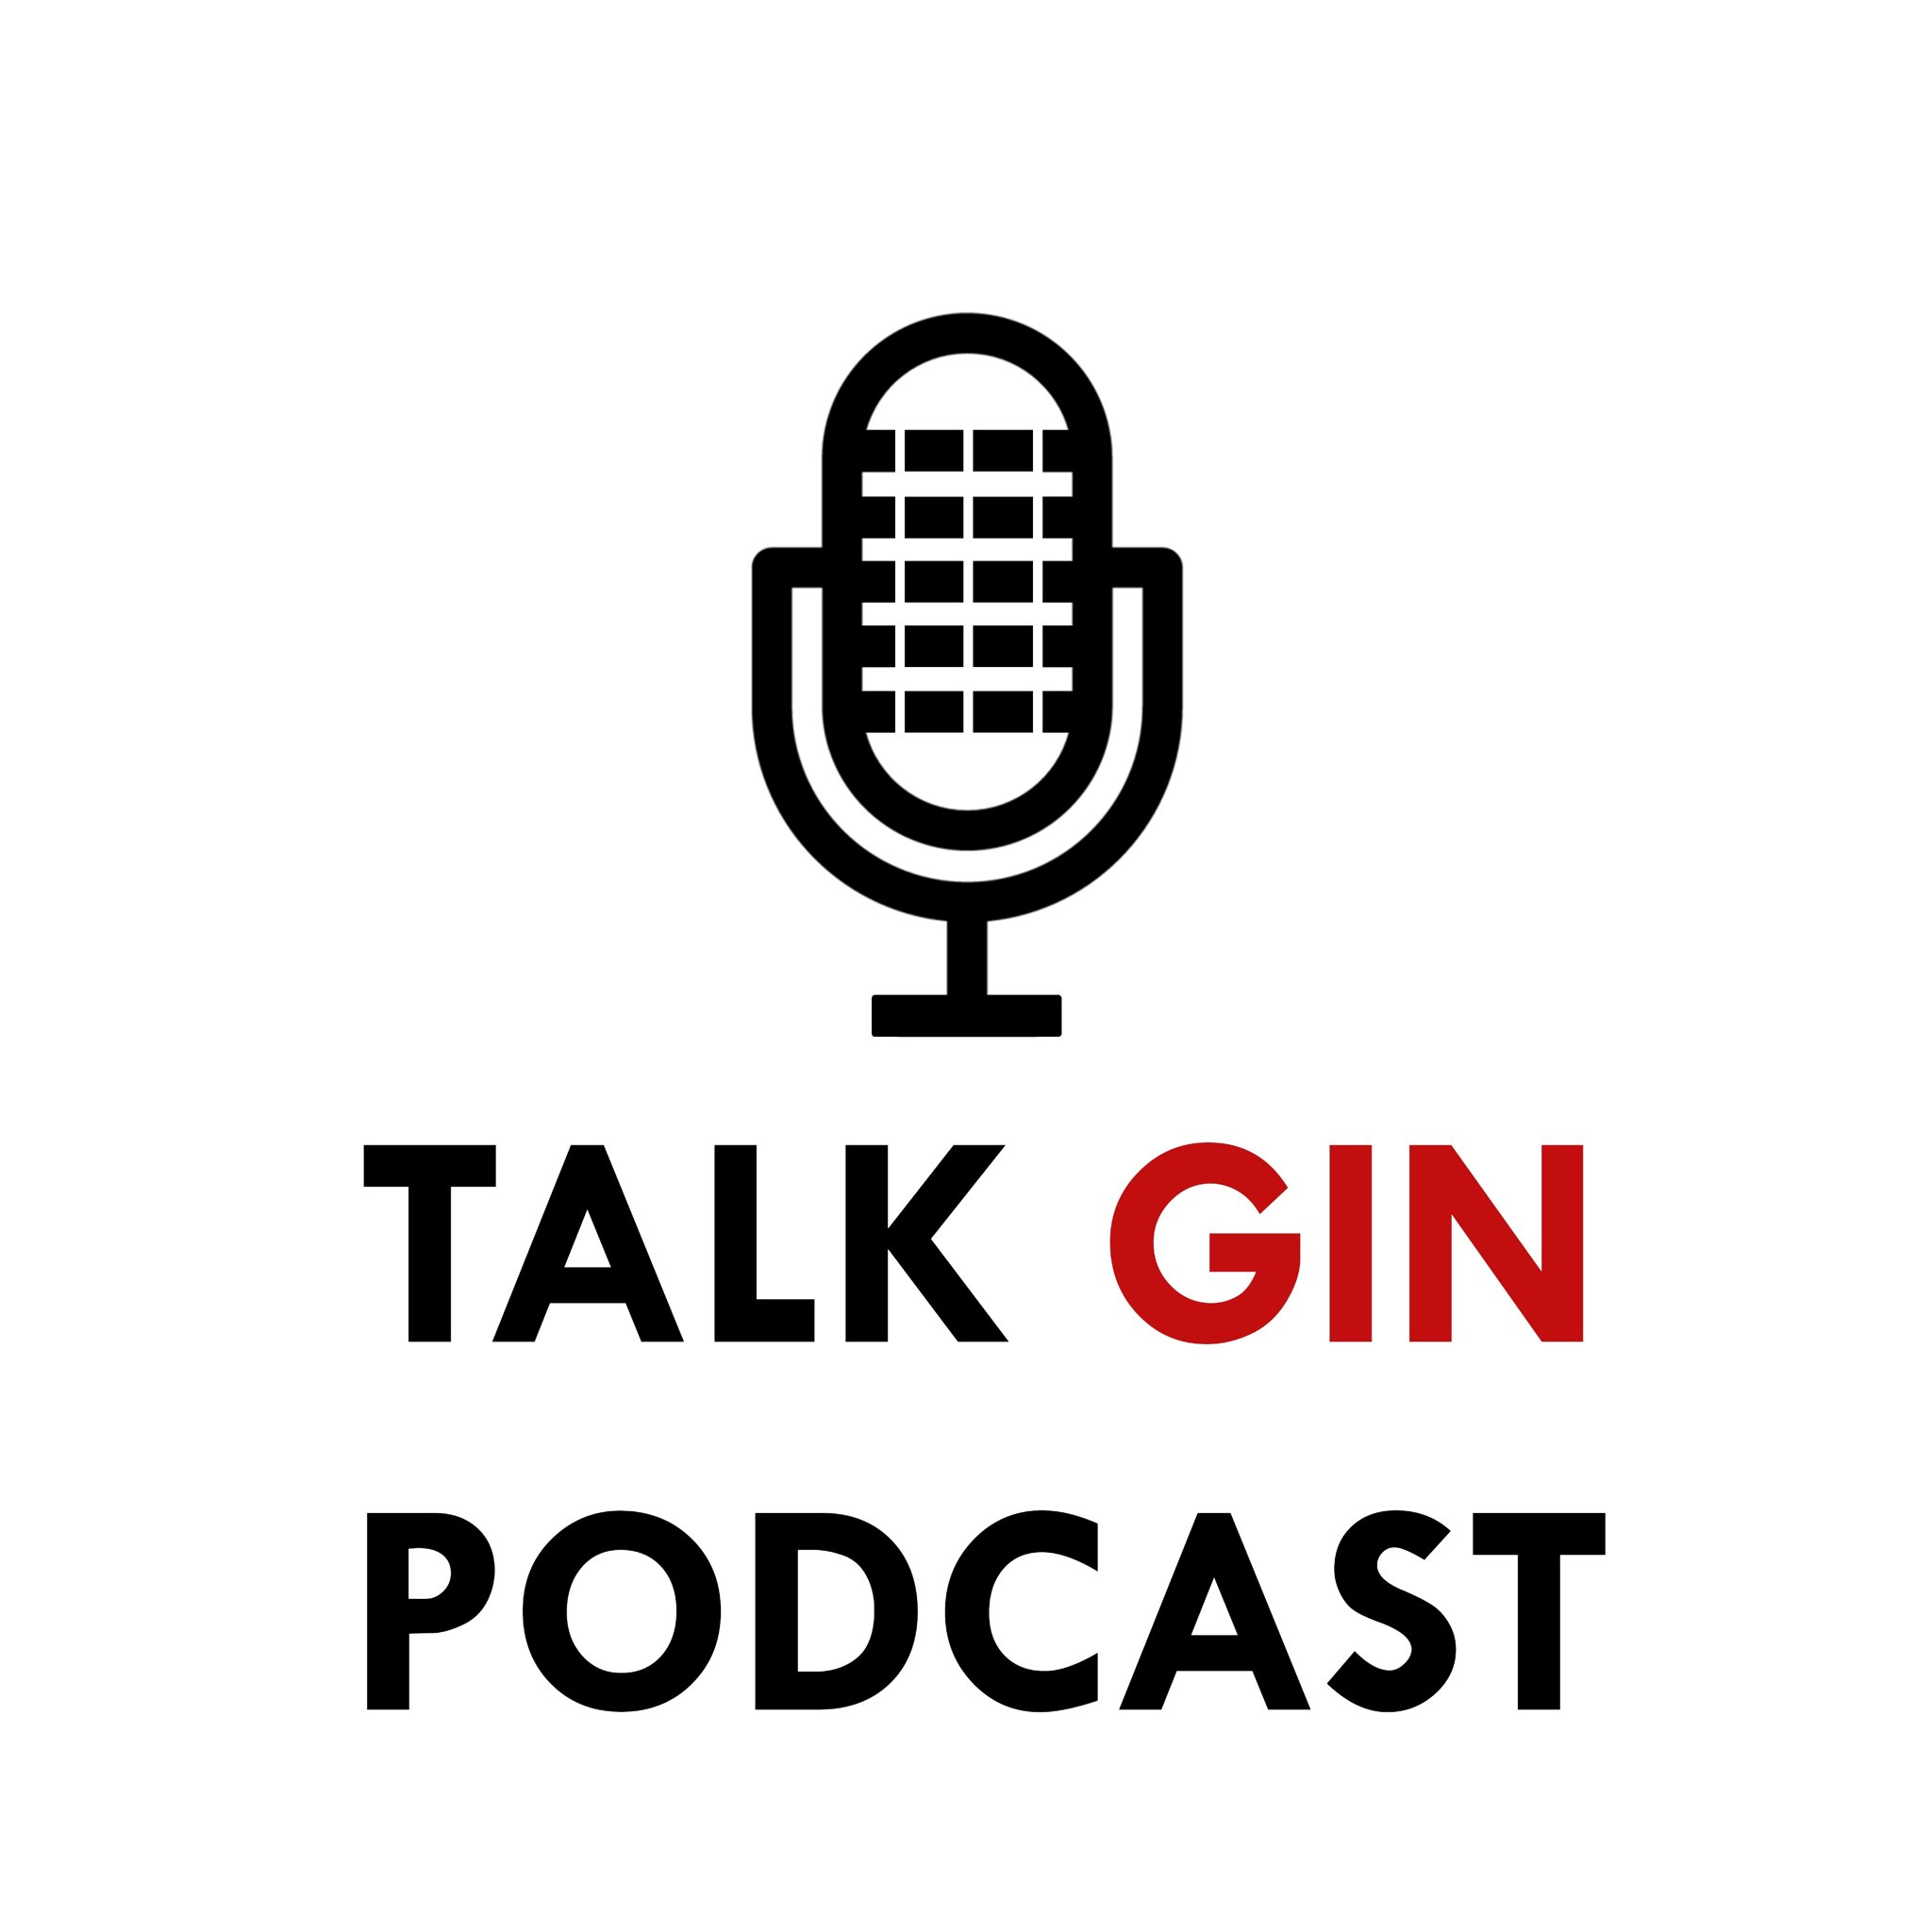 GIN PODCAST.  We're going to debate, chat, interview - distillers, brands and more. Hosted by James Sutherland @fiftysixnorth and Sean Murphy @DistillaSean